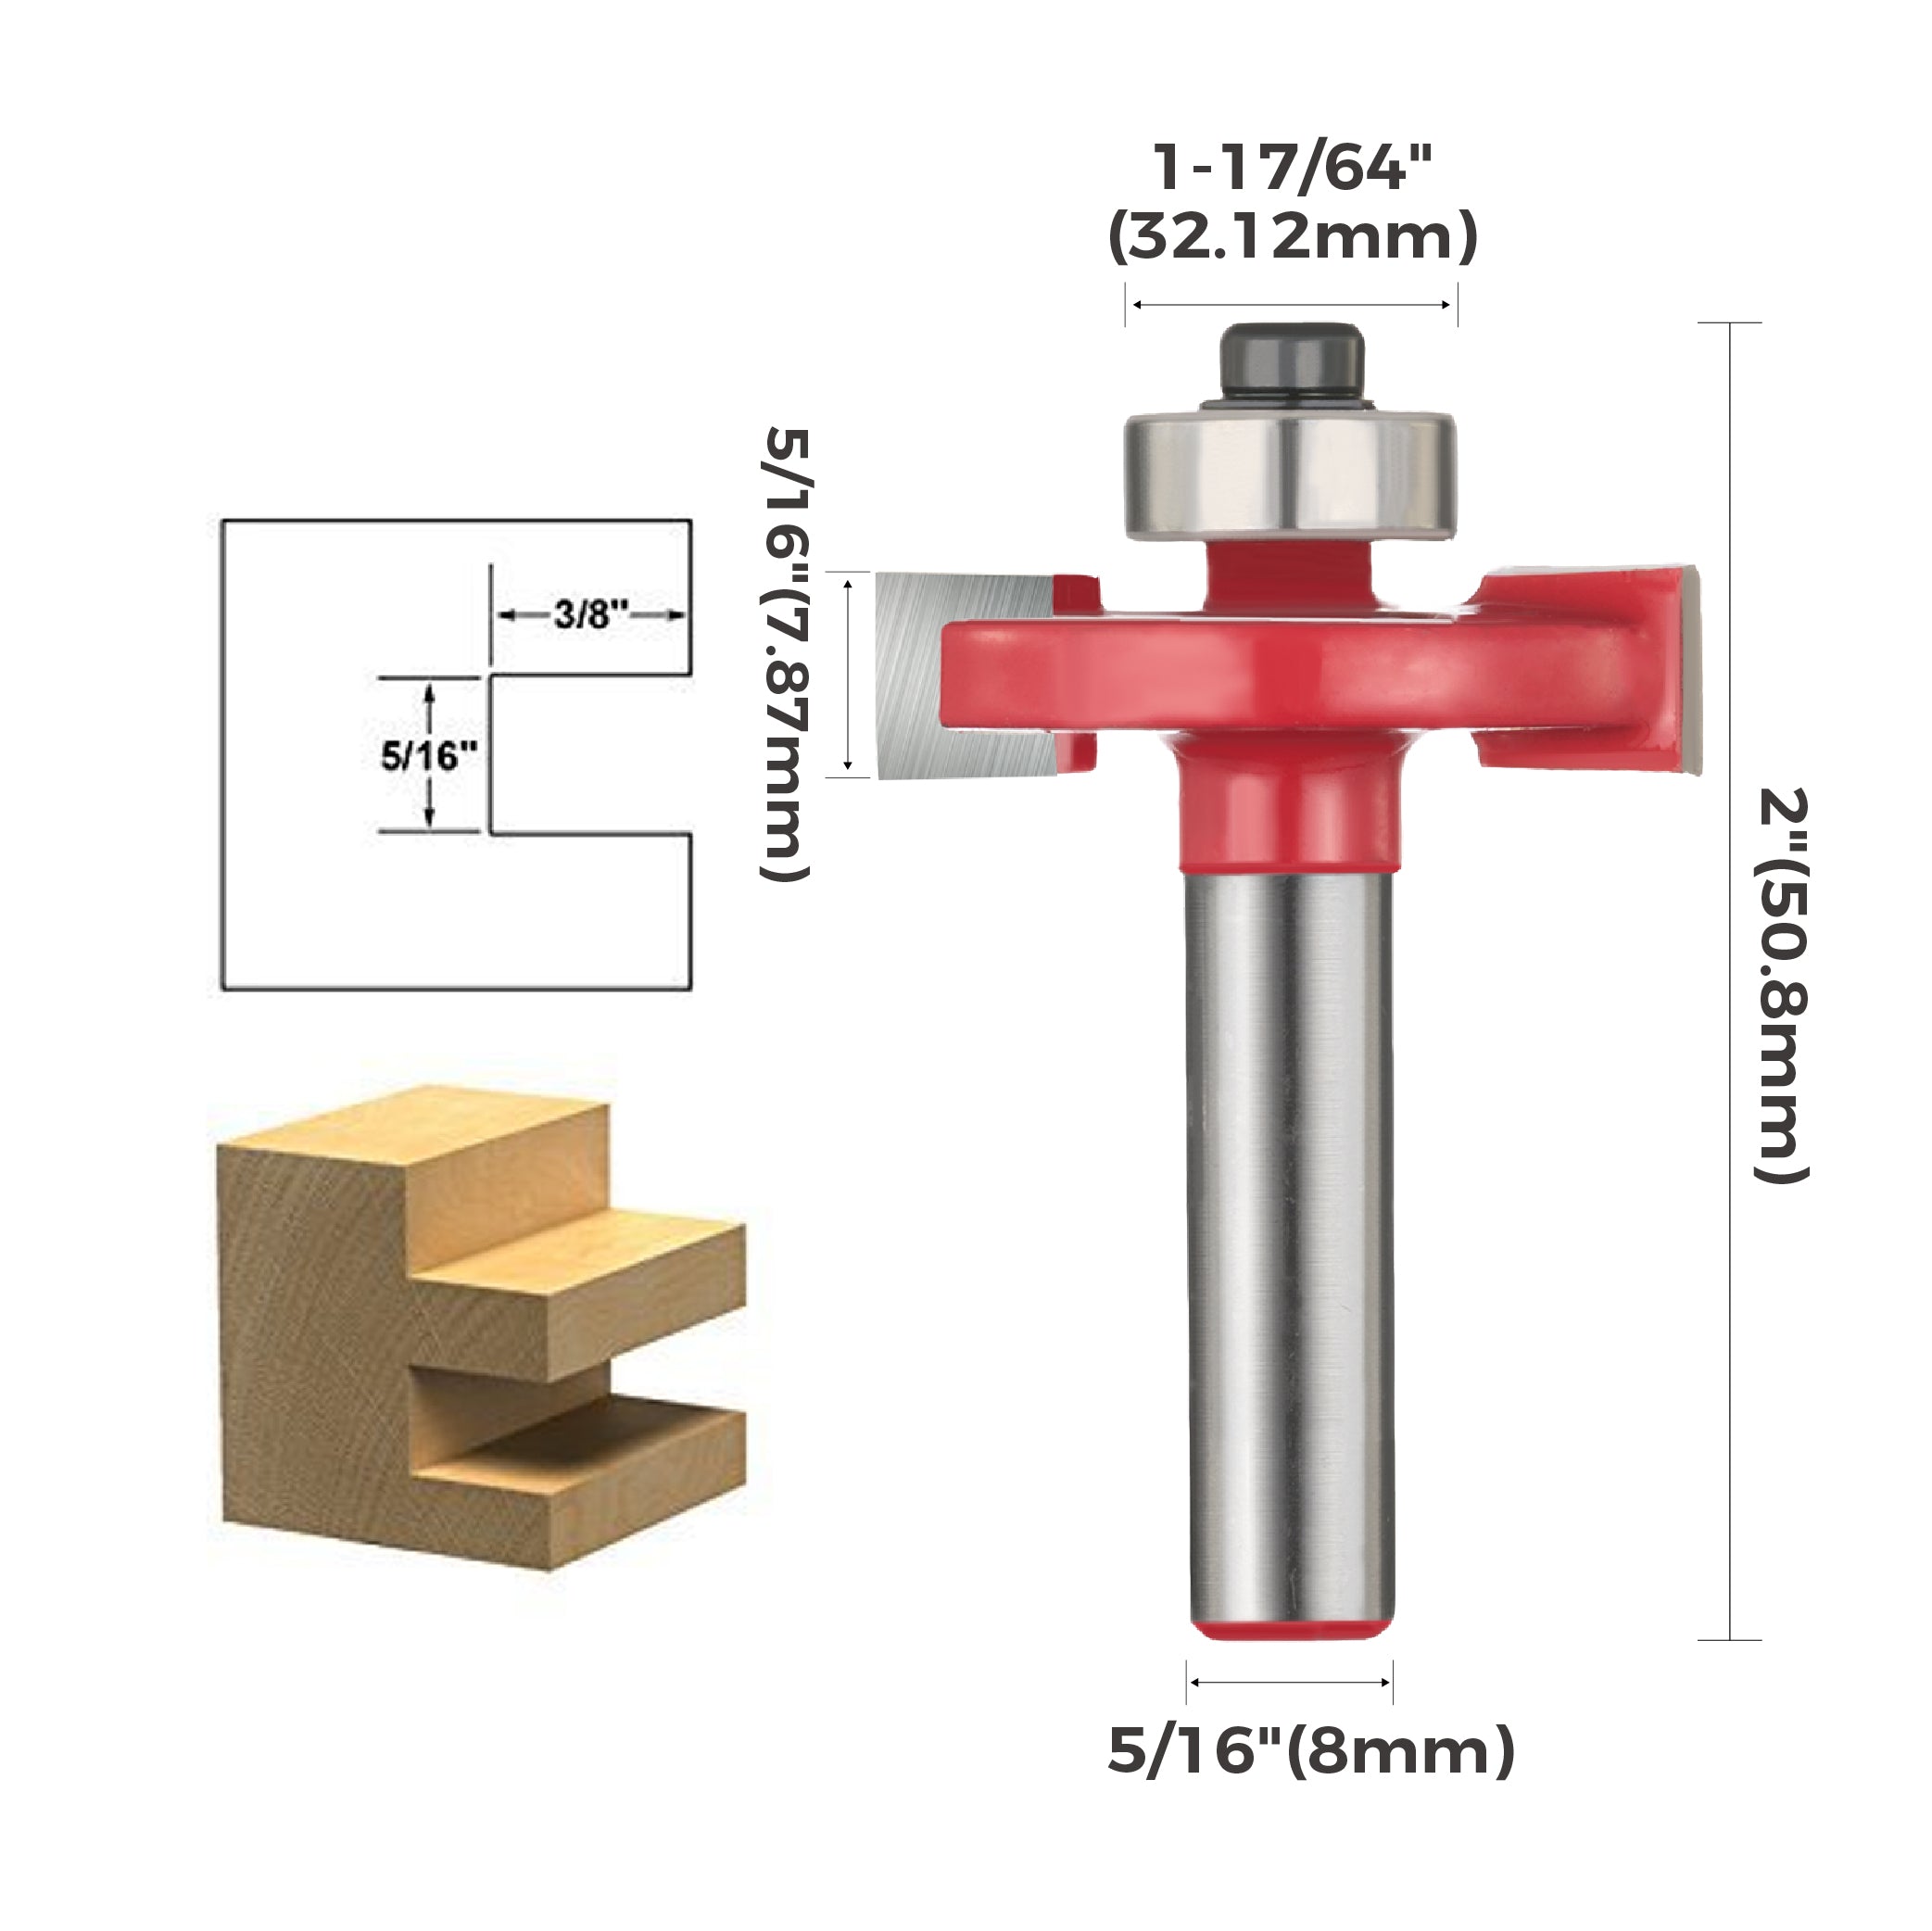 toolant Rabbet Router Bits , 5/16-Inch Shank 5/16-Inch Height X 3/8-Inch Depth, Carbide-Tipped Milling Cutter for Woodworking